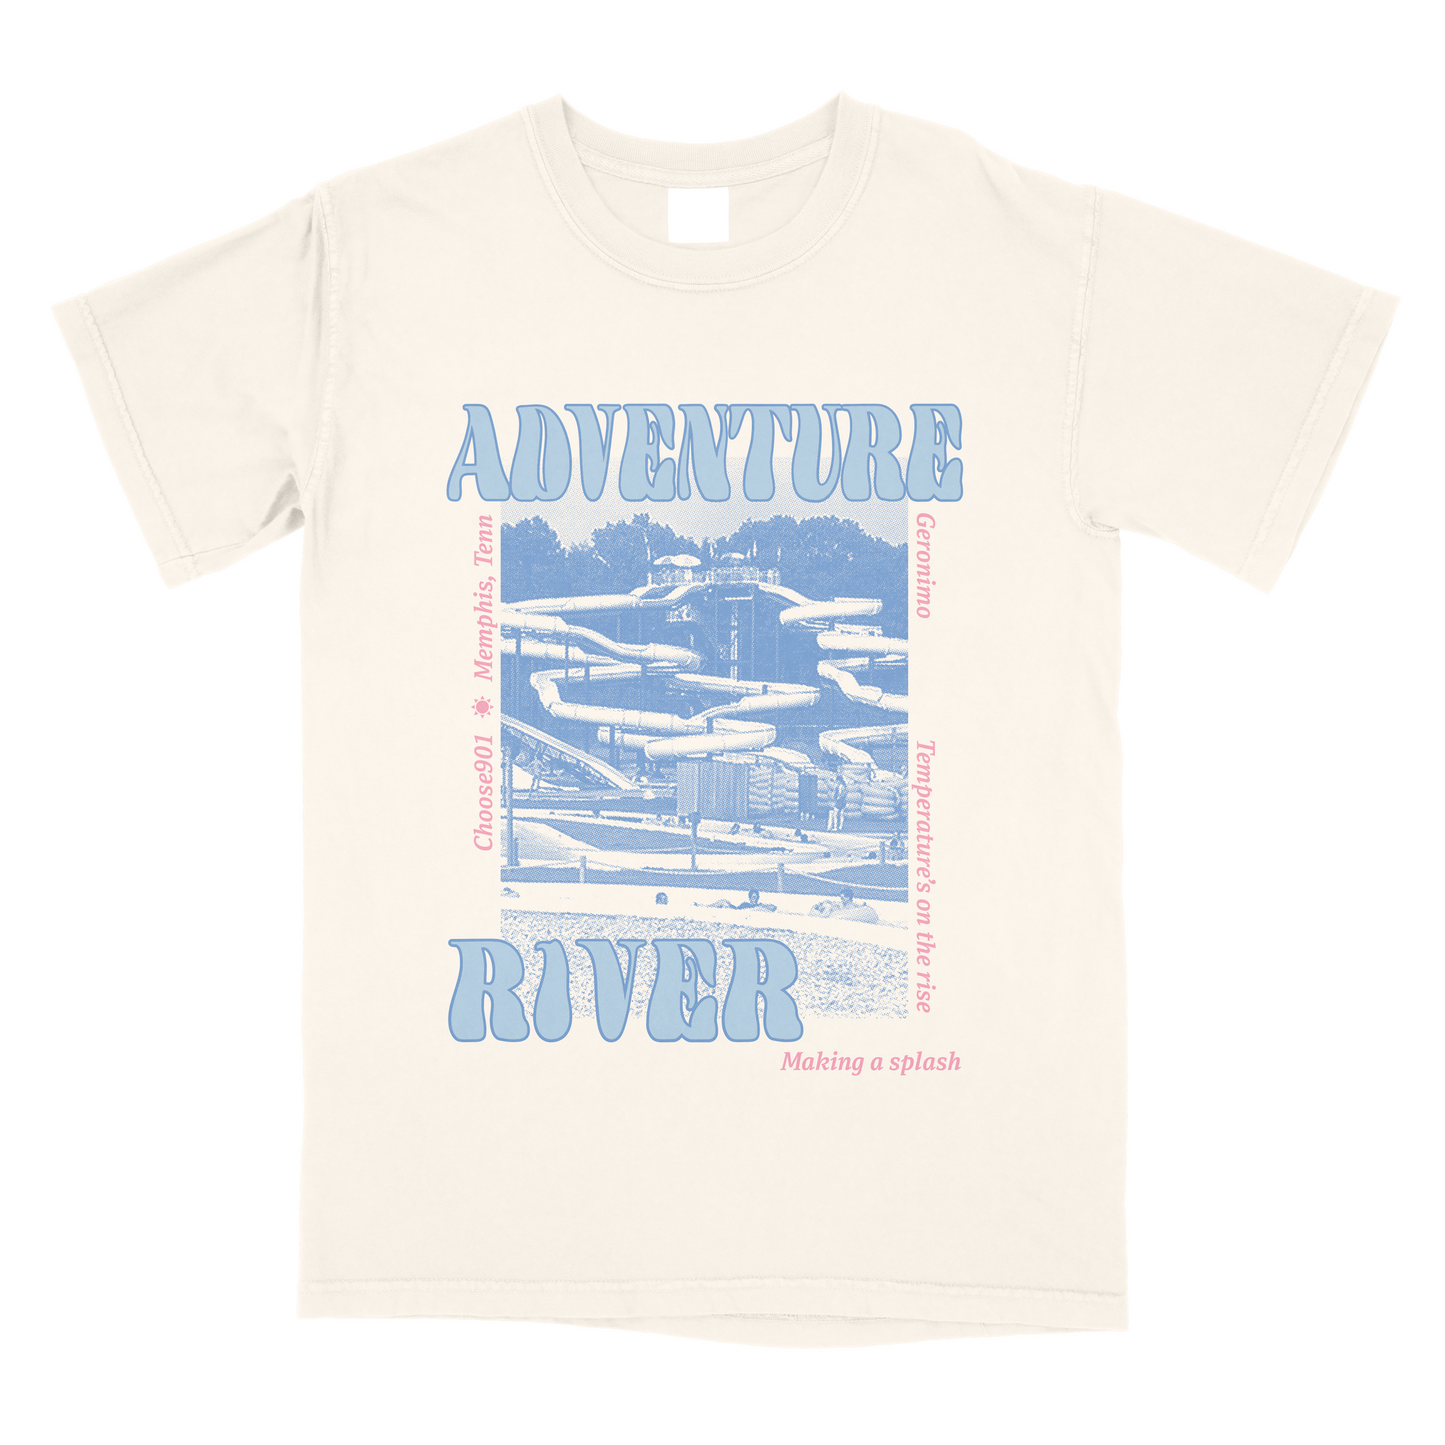 Adventure River Shirt Ivory from the Choose901 Merch Shop featuring a Memphis bridge and water illustration.